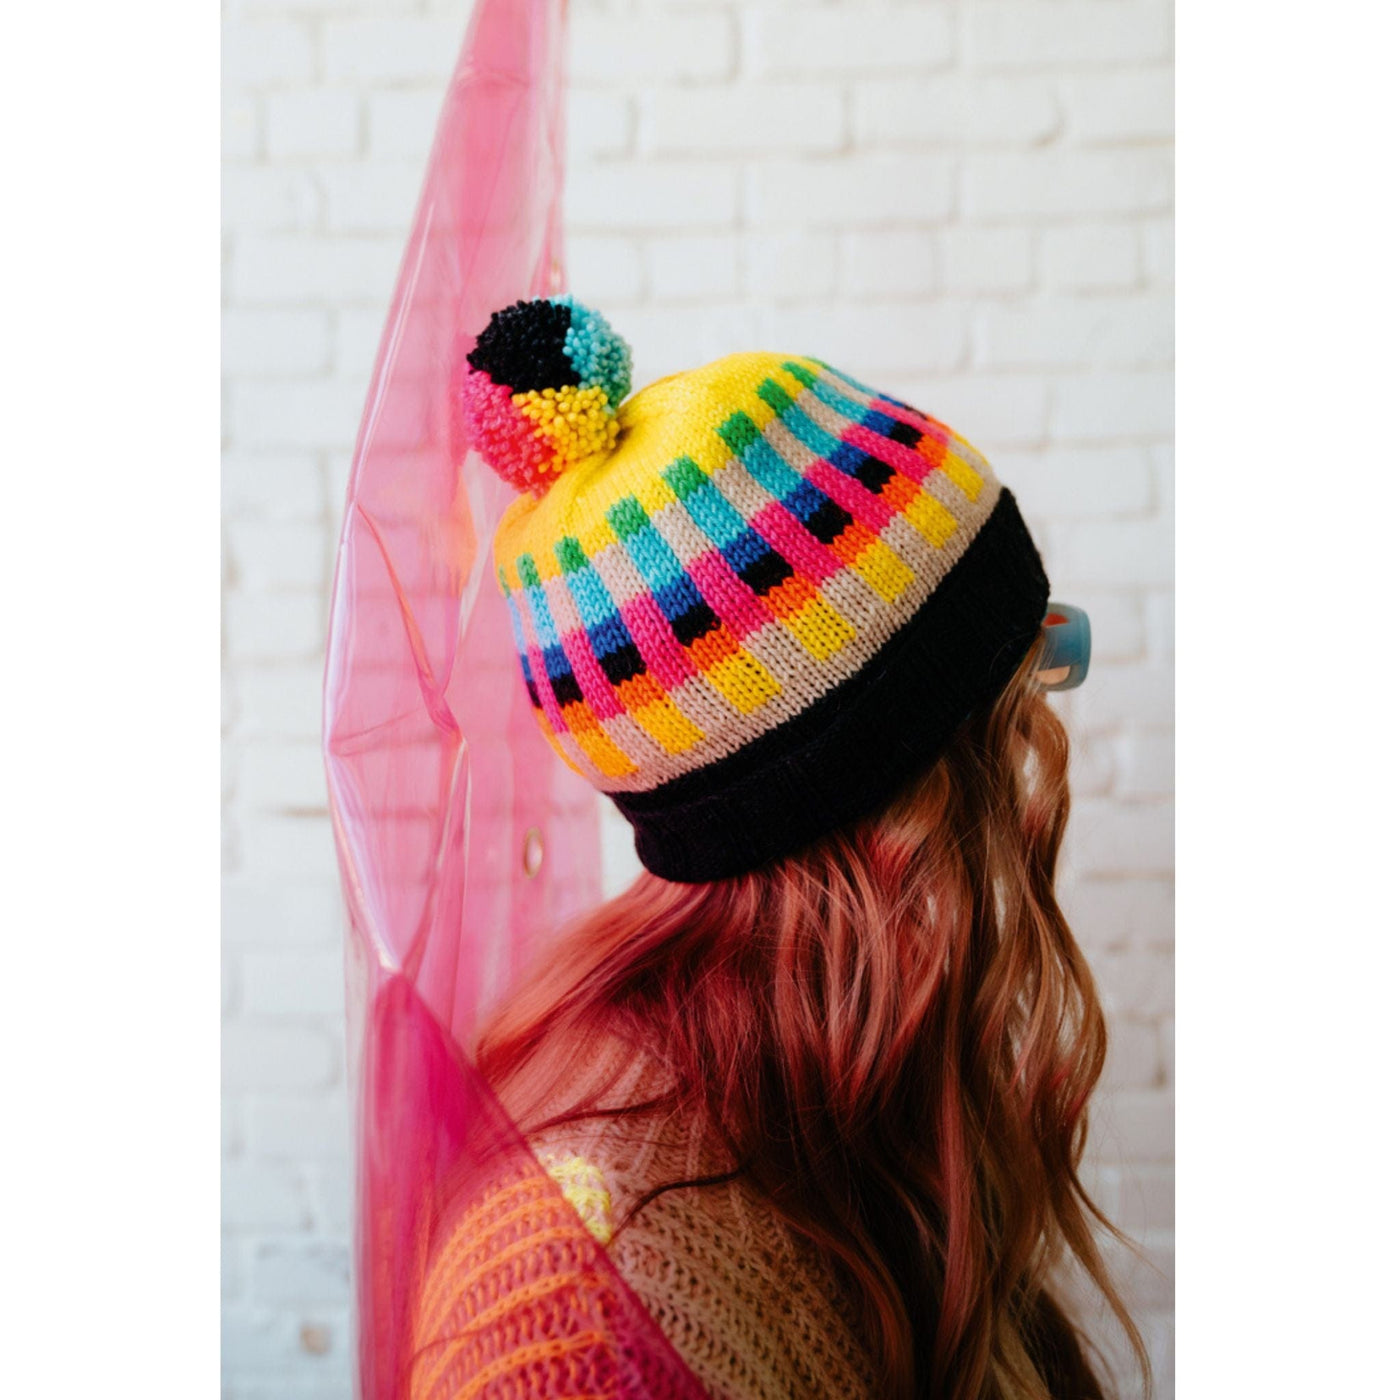 A woman wearing a bright and colorful knit hat featuring bands of bright colors and topped with a colorful pompom.